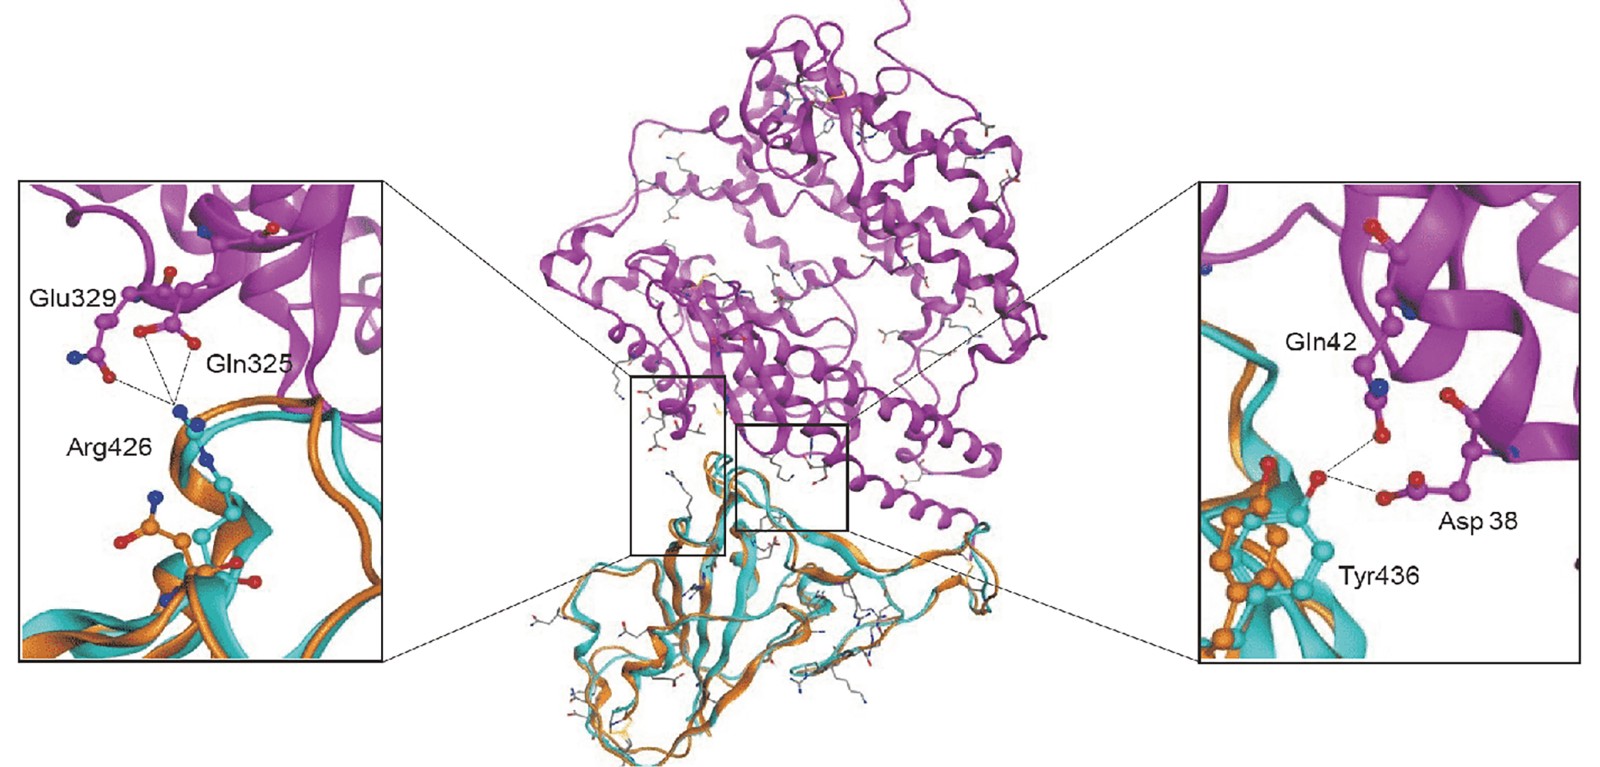 Protein Homology Modeling for Coronavirus Research